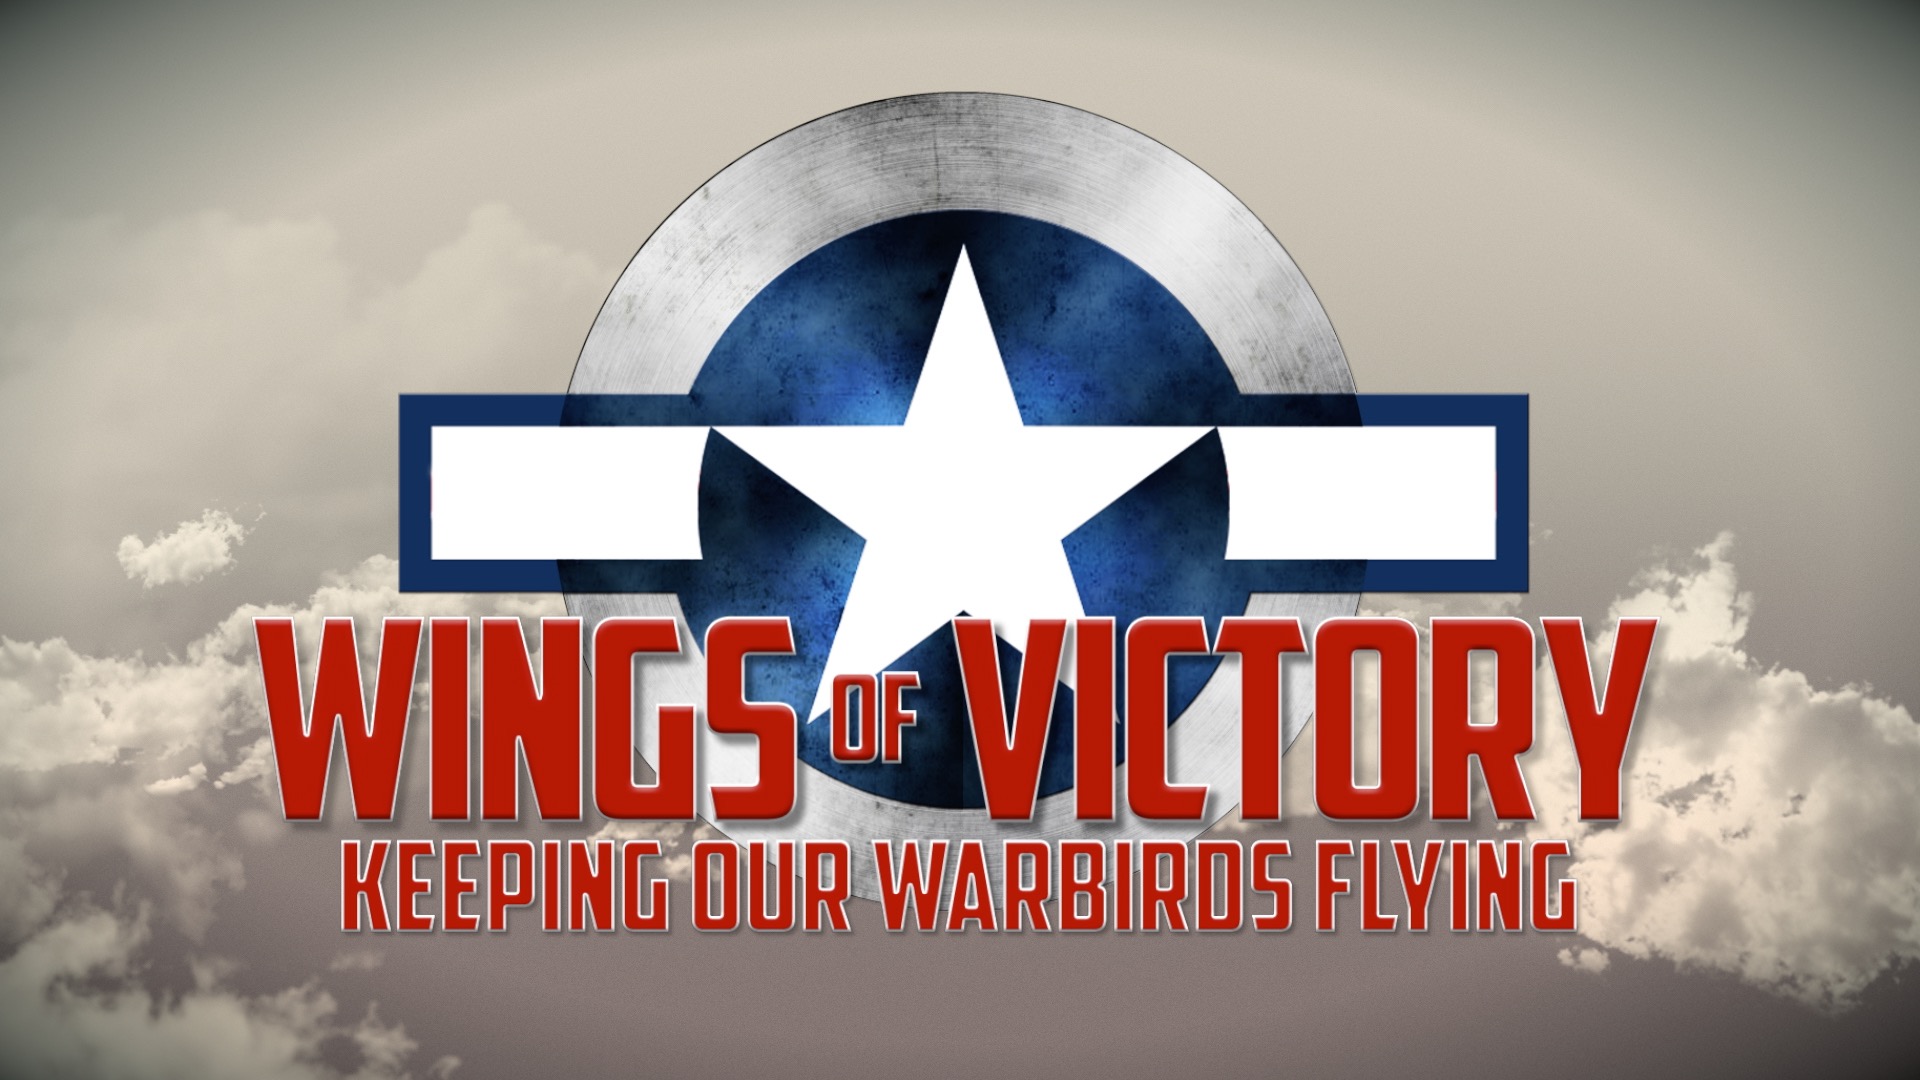 DSC to host “Wings of Victory” viewing along with veterans’ panel discussion